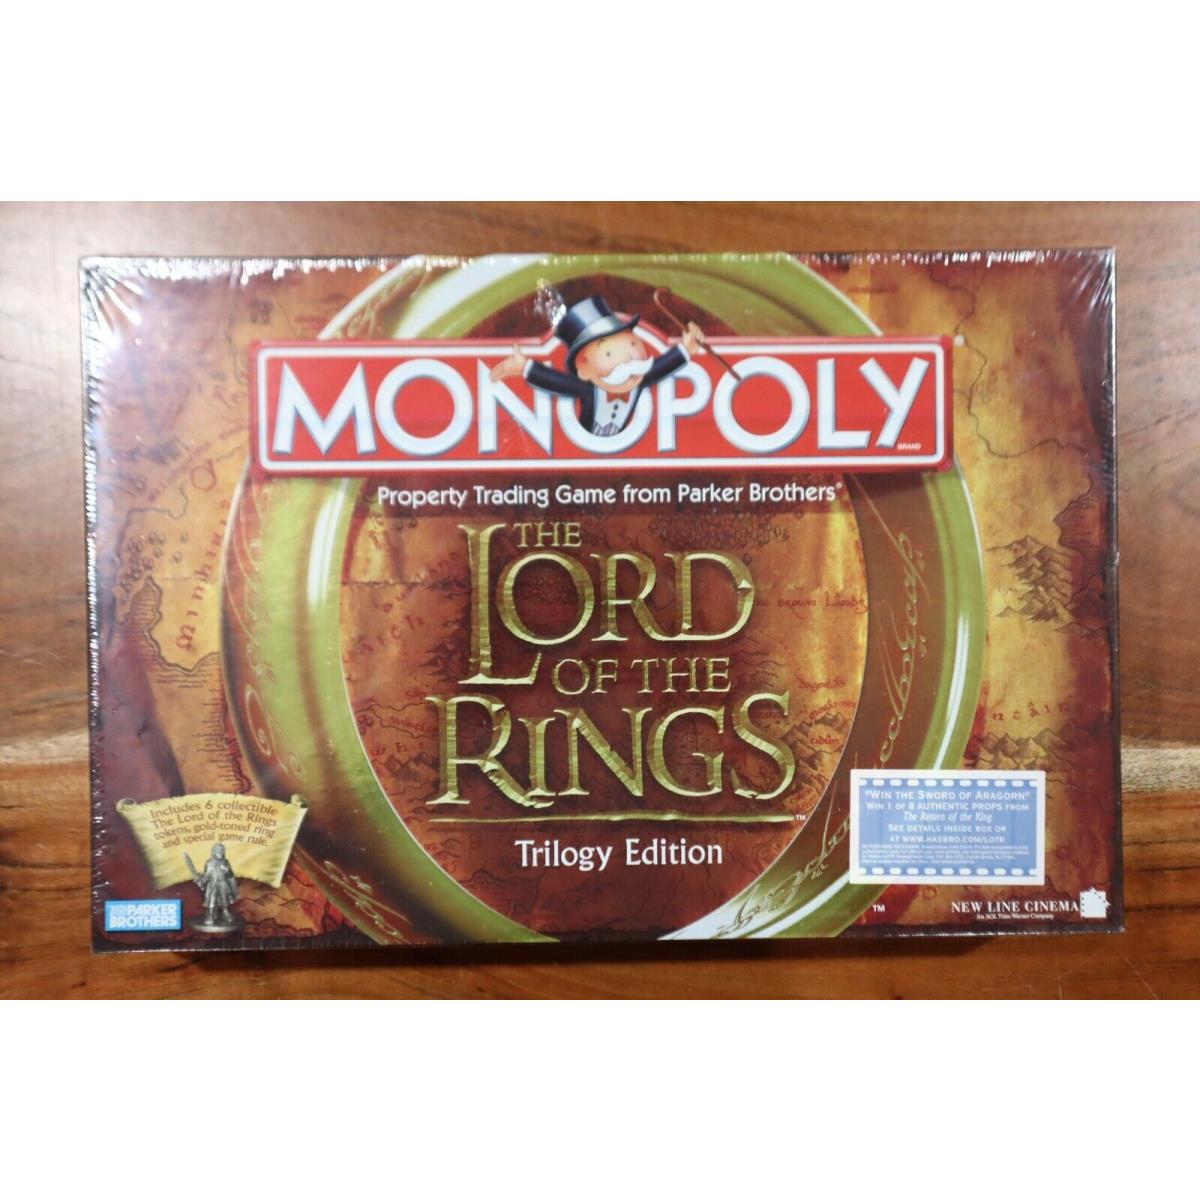 Monopoly Lord of The Rings Trilogy Edition Board Game 2003 Hasbro p